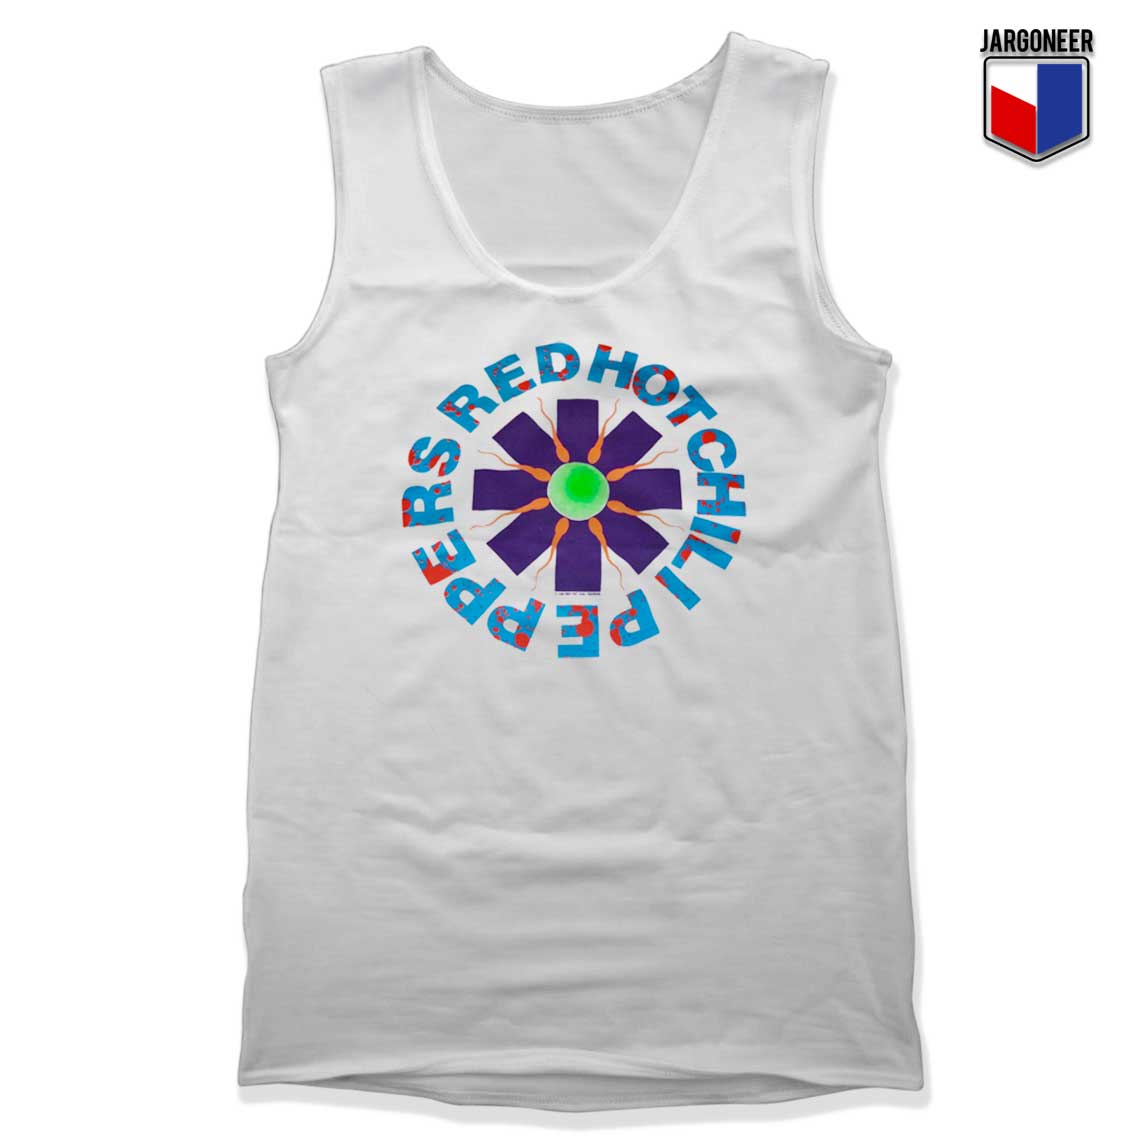 Red hot Chili Peppers Tank Top - Shop Unique Graphic Cool Shirt Designs